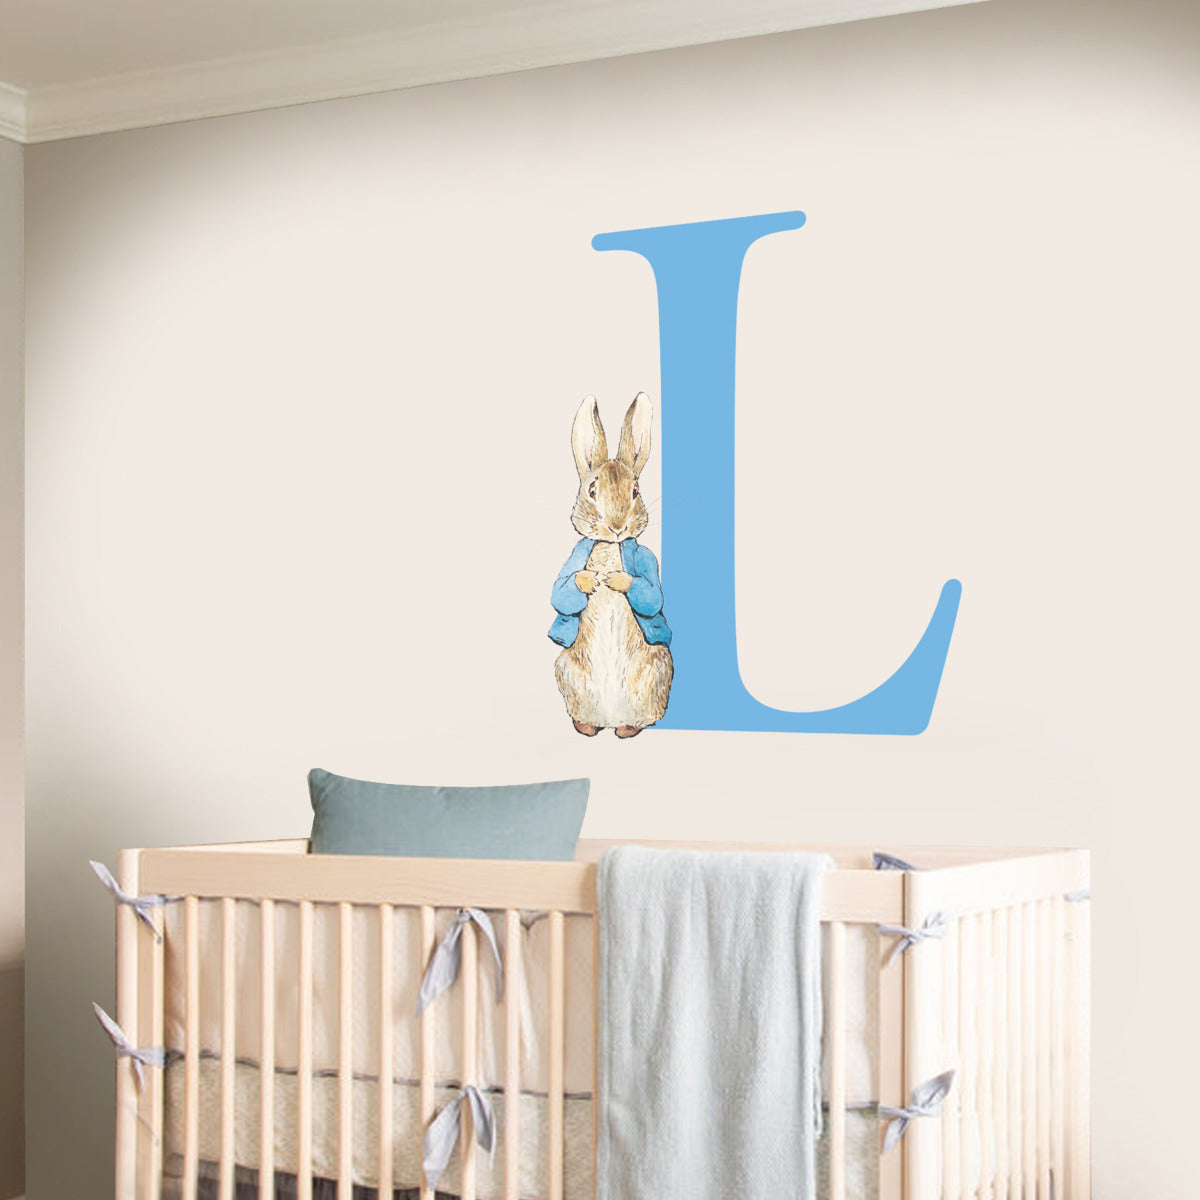 Peter Rabbit & Personalised Letter Wall Sticker